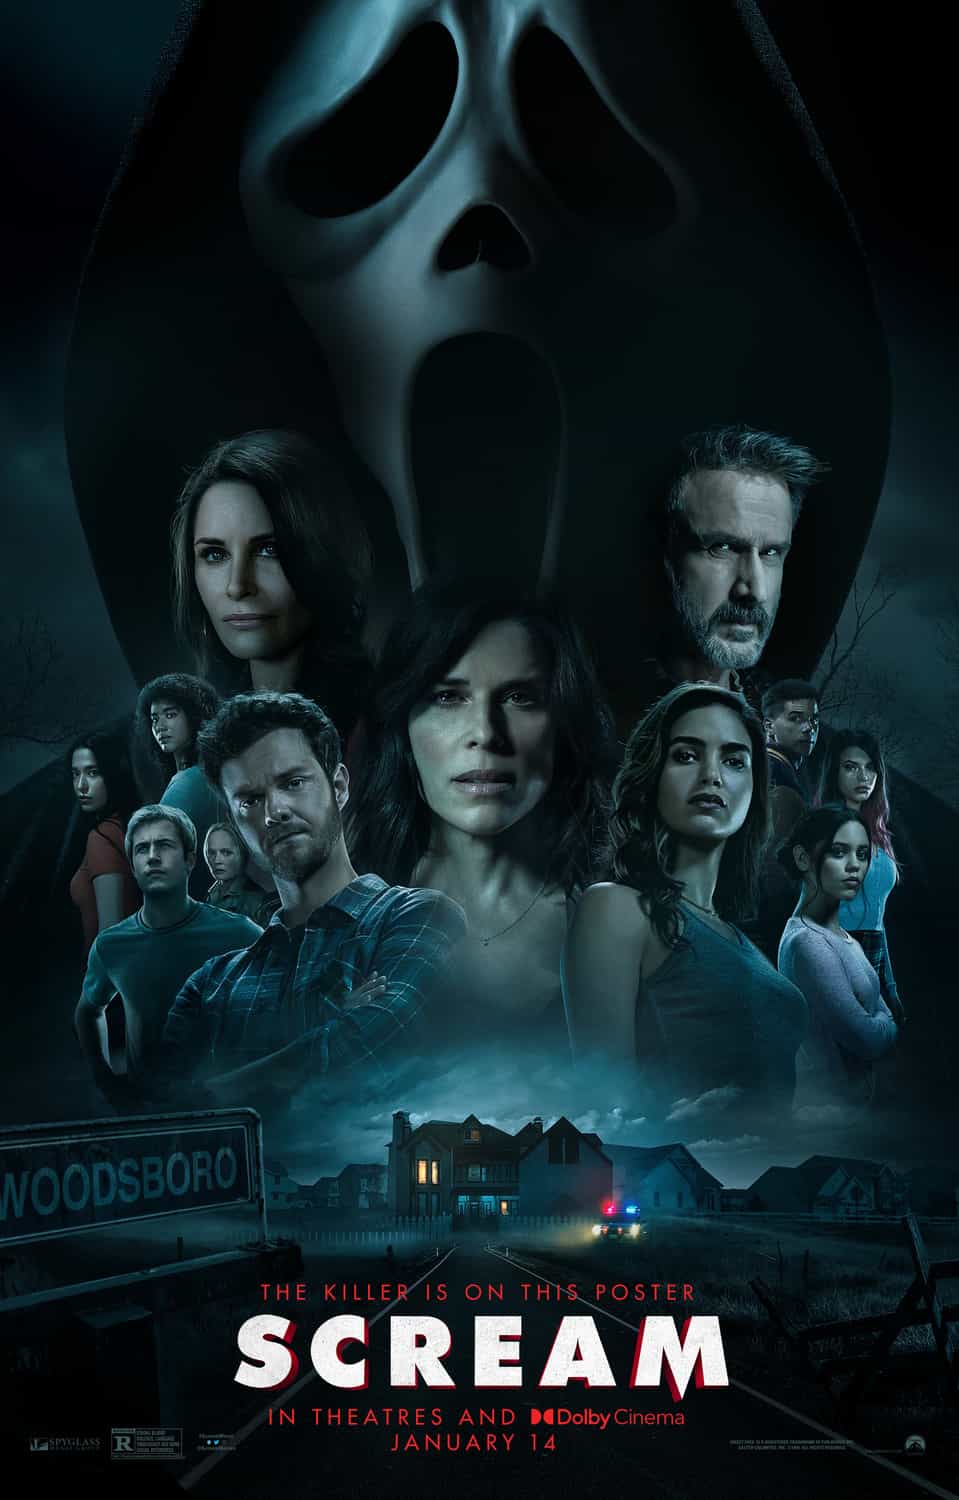 Scream (2022) is given an 18 rating in the UK for strong bloody violence